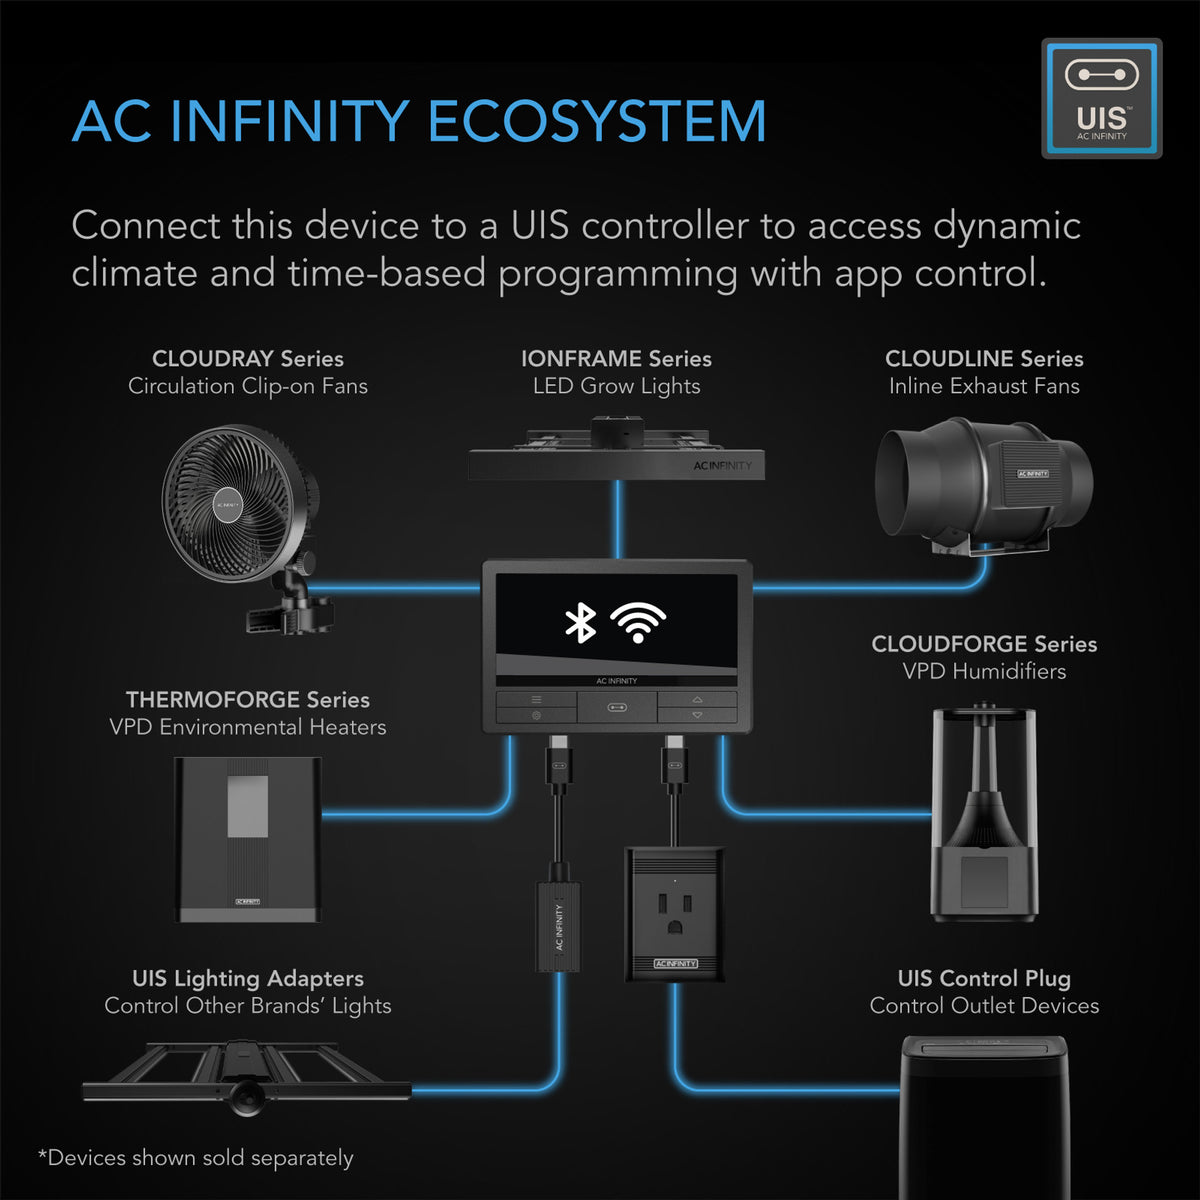 AC Infinity Ecosystem connection